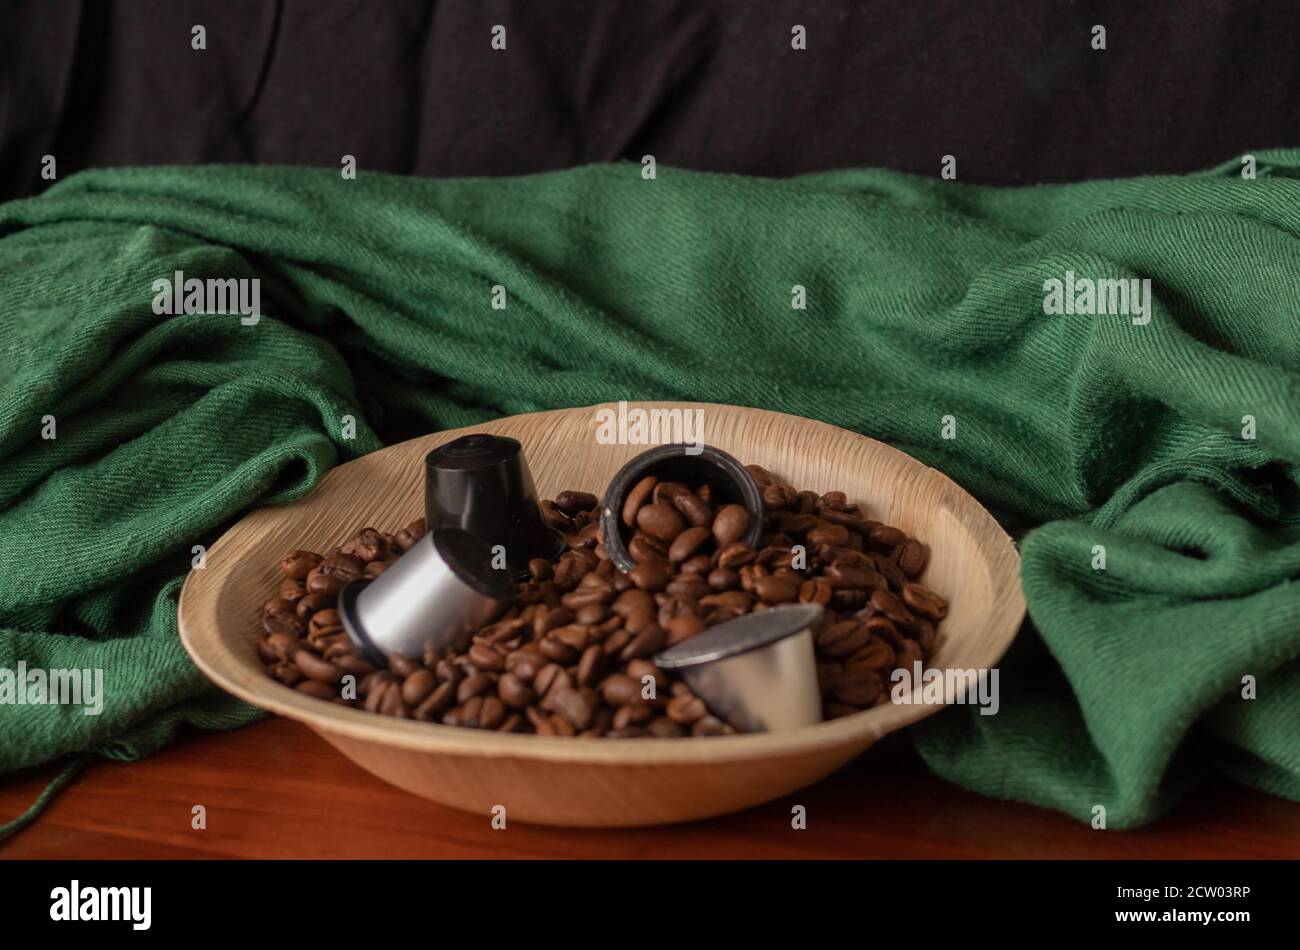 Italian espresso capsules or coffee pods with roasted coffee beans ready for a good day Stock Photo